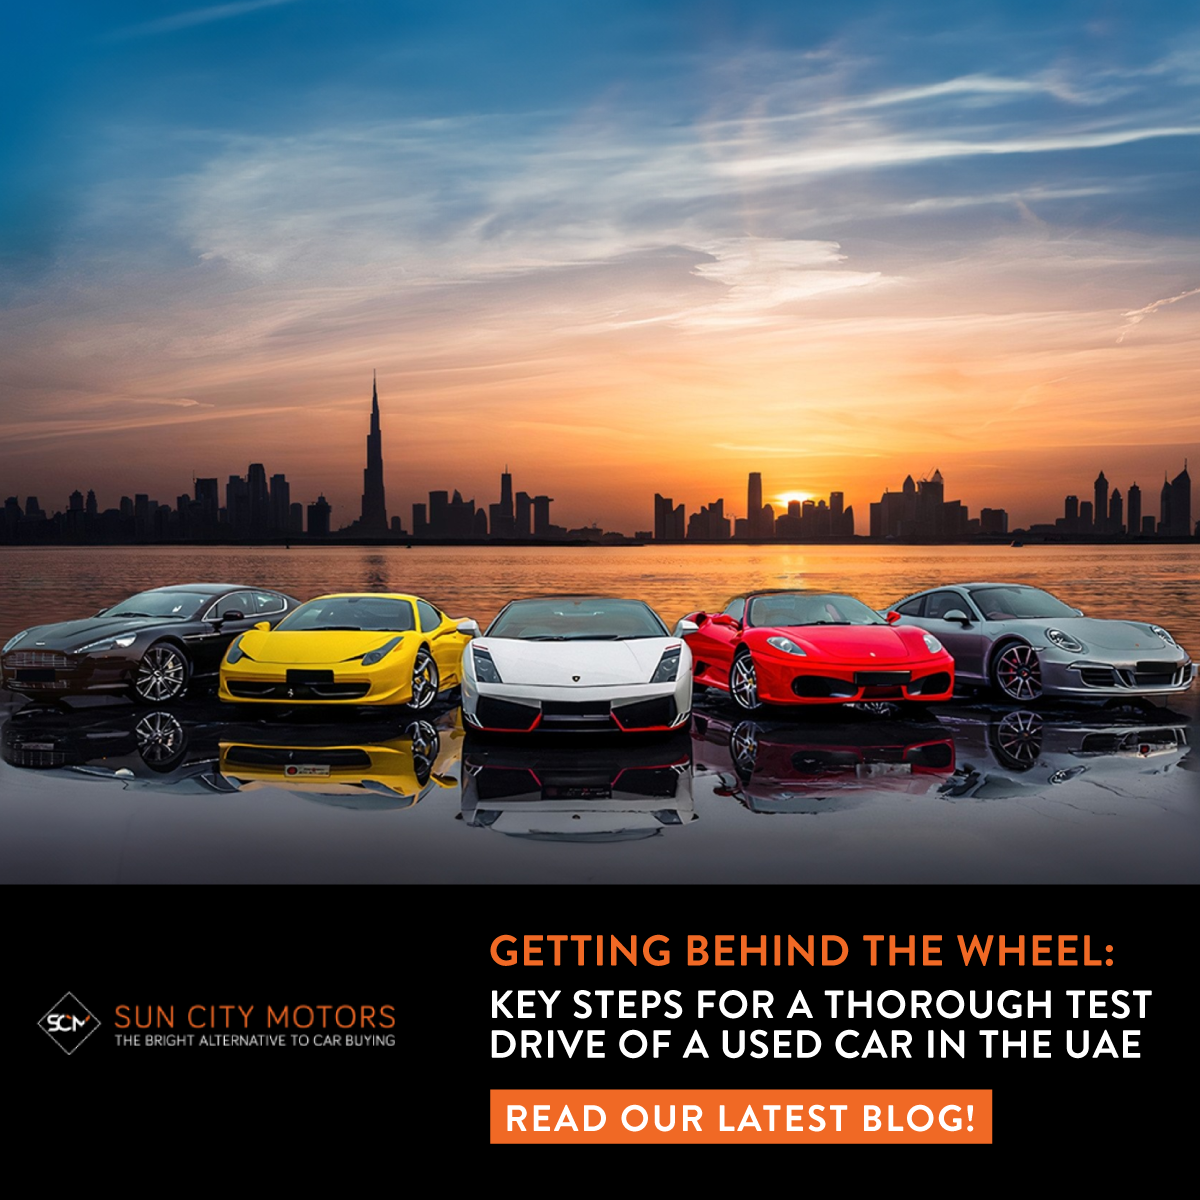 Test Drive of a Used Car in the UAE